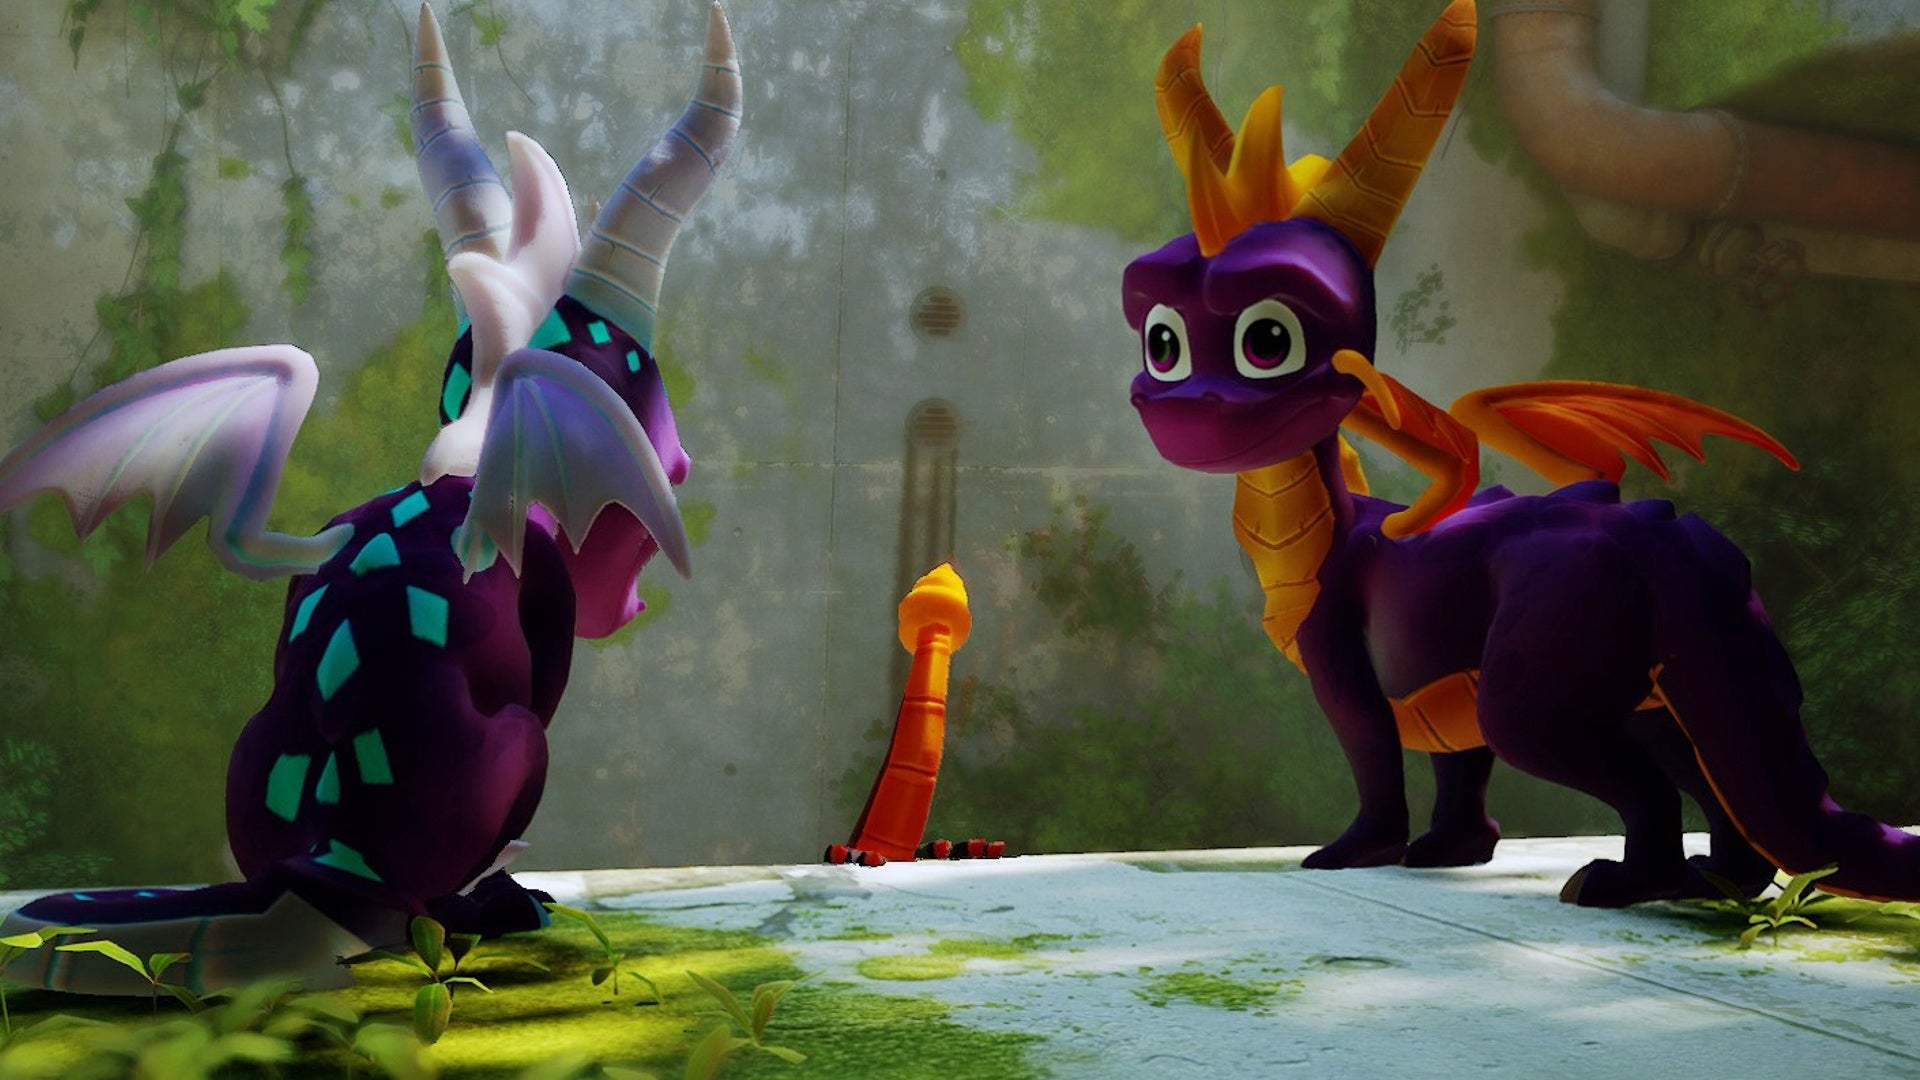 Spyro the dragon has been modded into indie hit cat sim Stray.